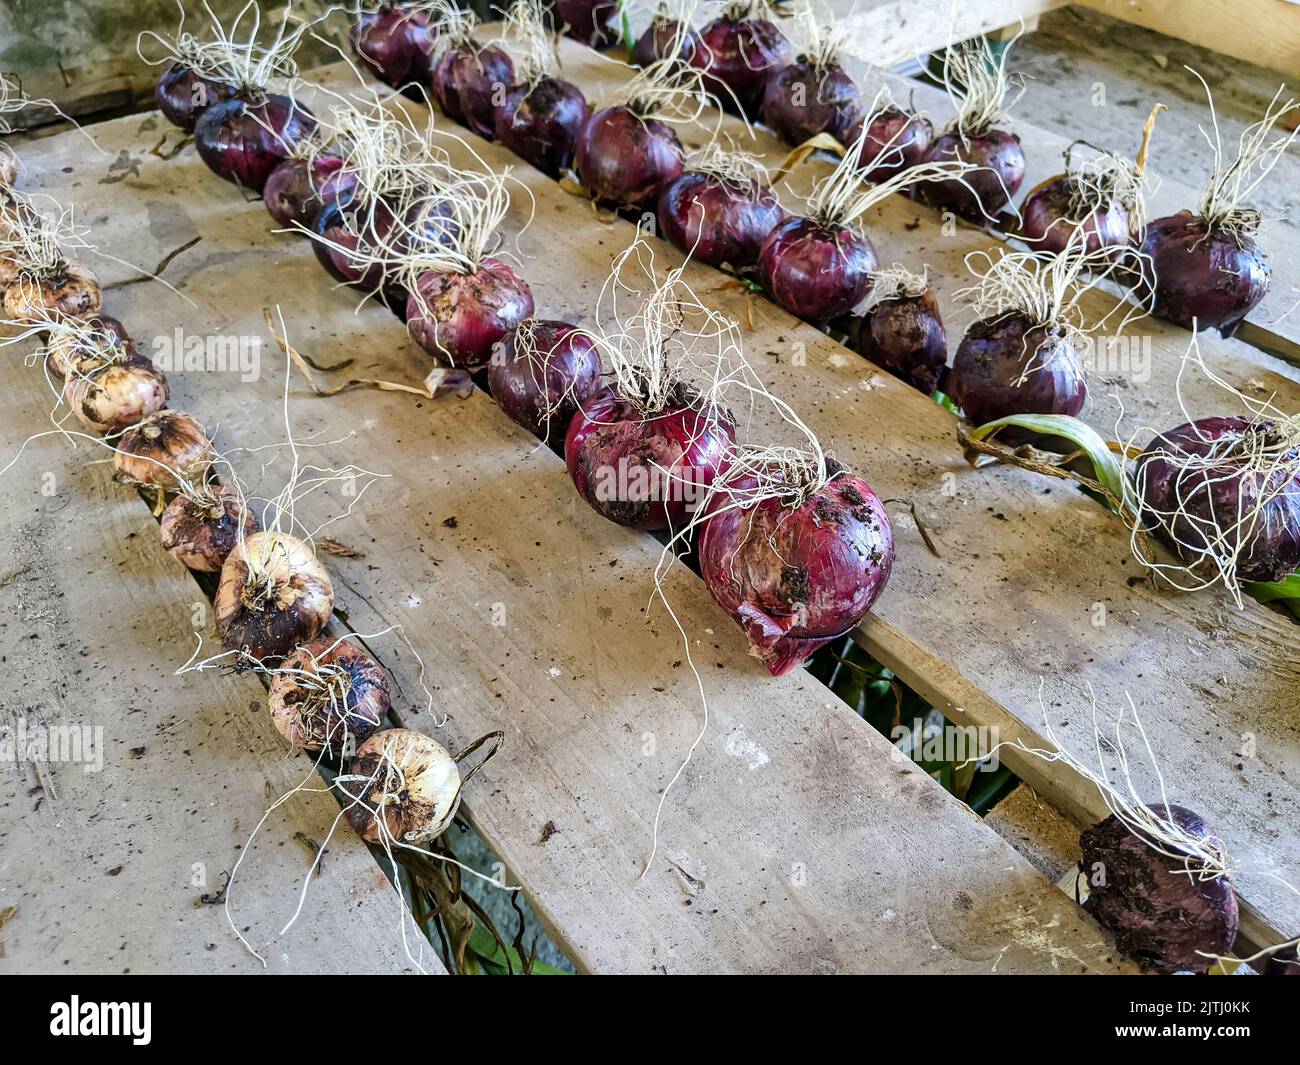 Variety of onions drying on a rack after being harvested from a vegetable garden. Stock Photo